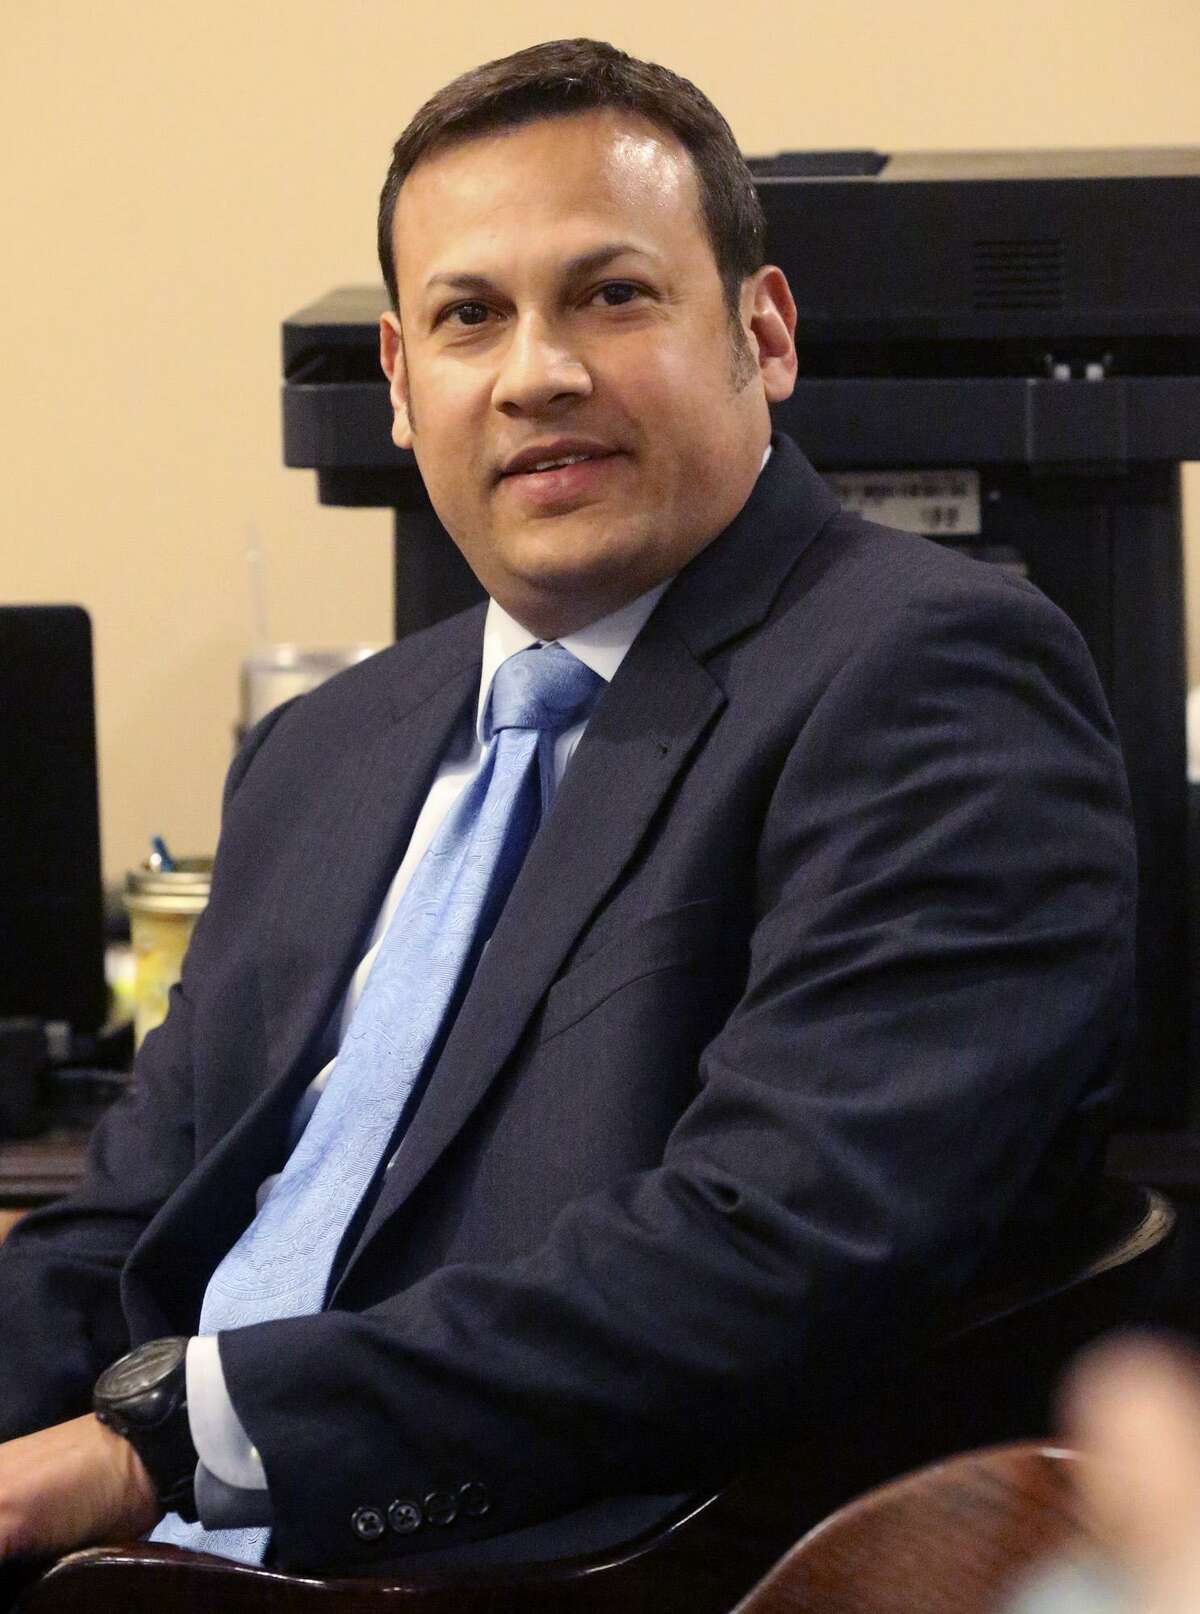 San Antonio attorney Mark Benvides sits in the 186th District Court Thursday March 23, 2017. The San Antonio attorney is accused of coercing clients into having sex with him in exchange for money or legal services and videotaping the encounters.